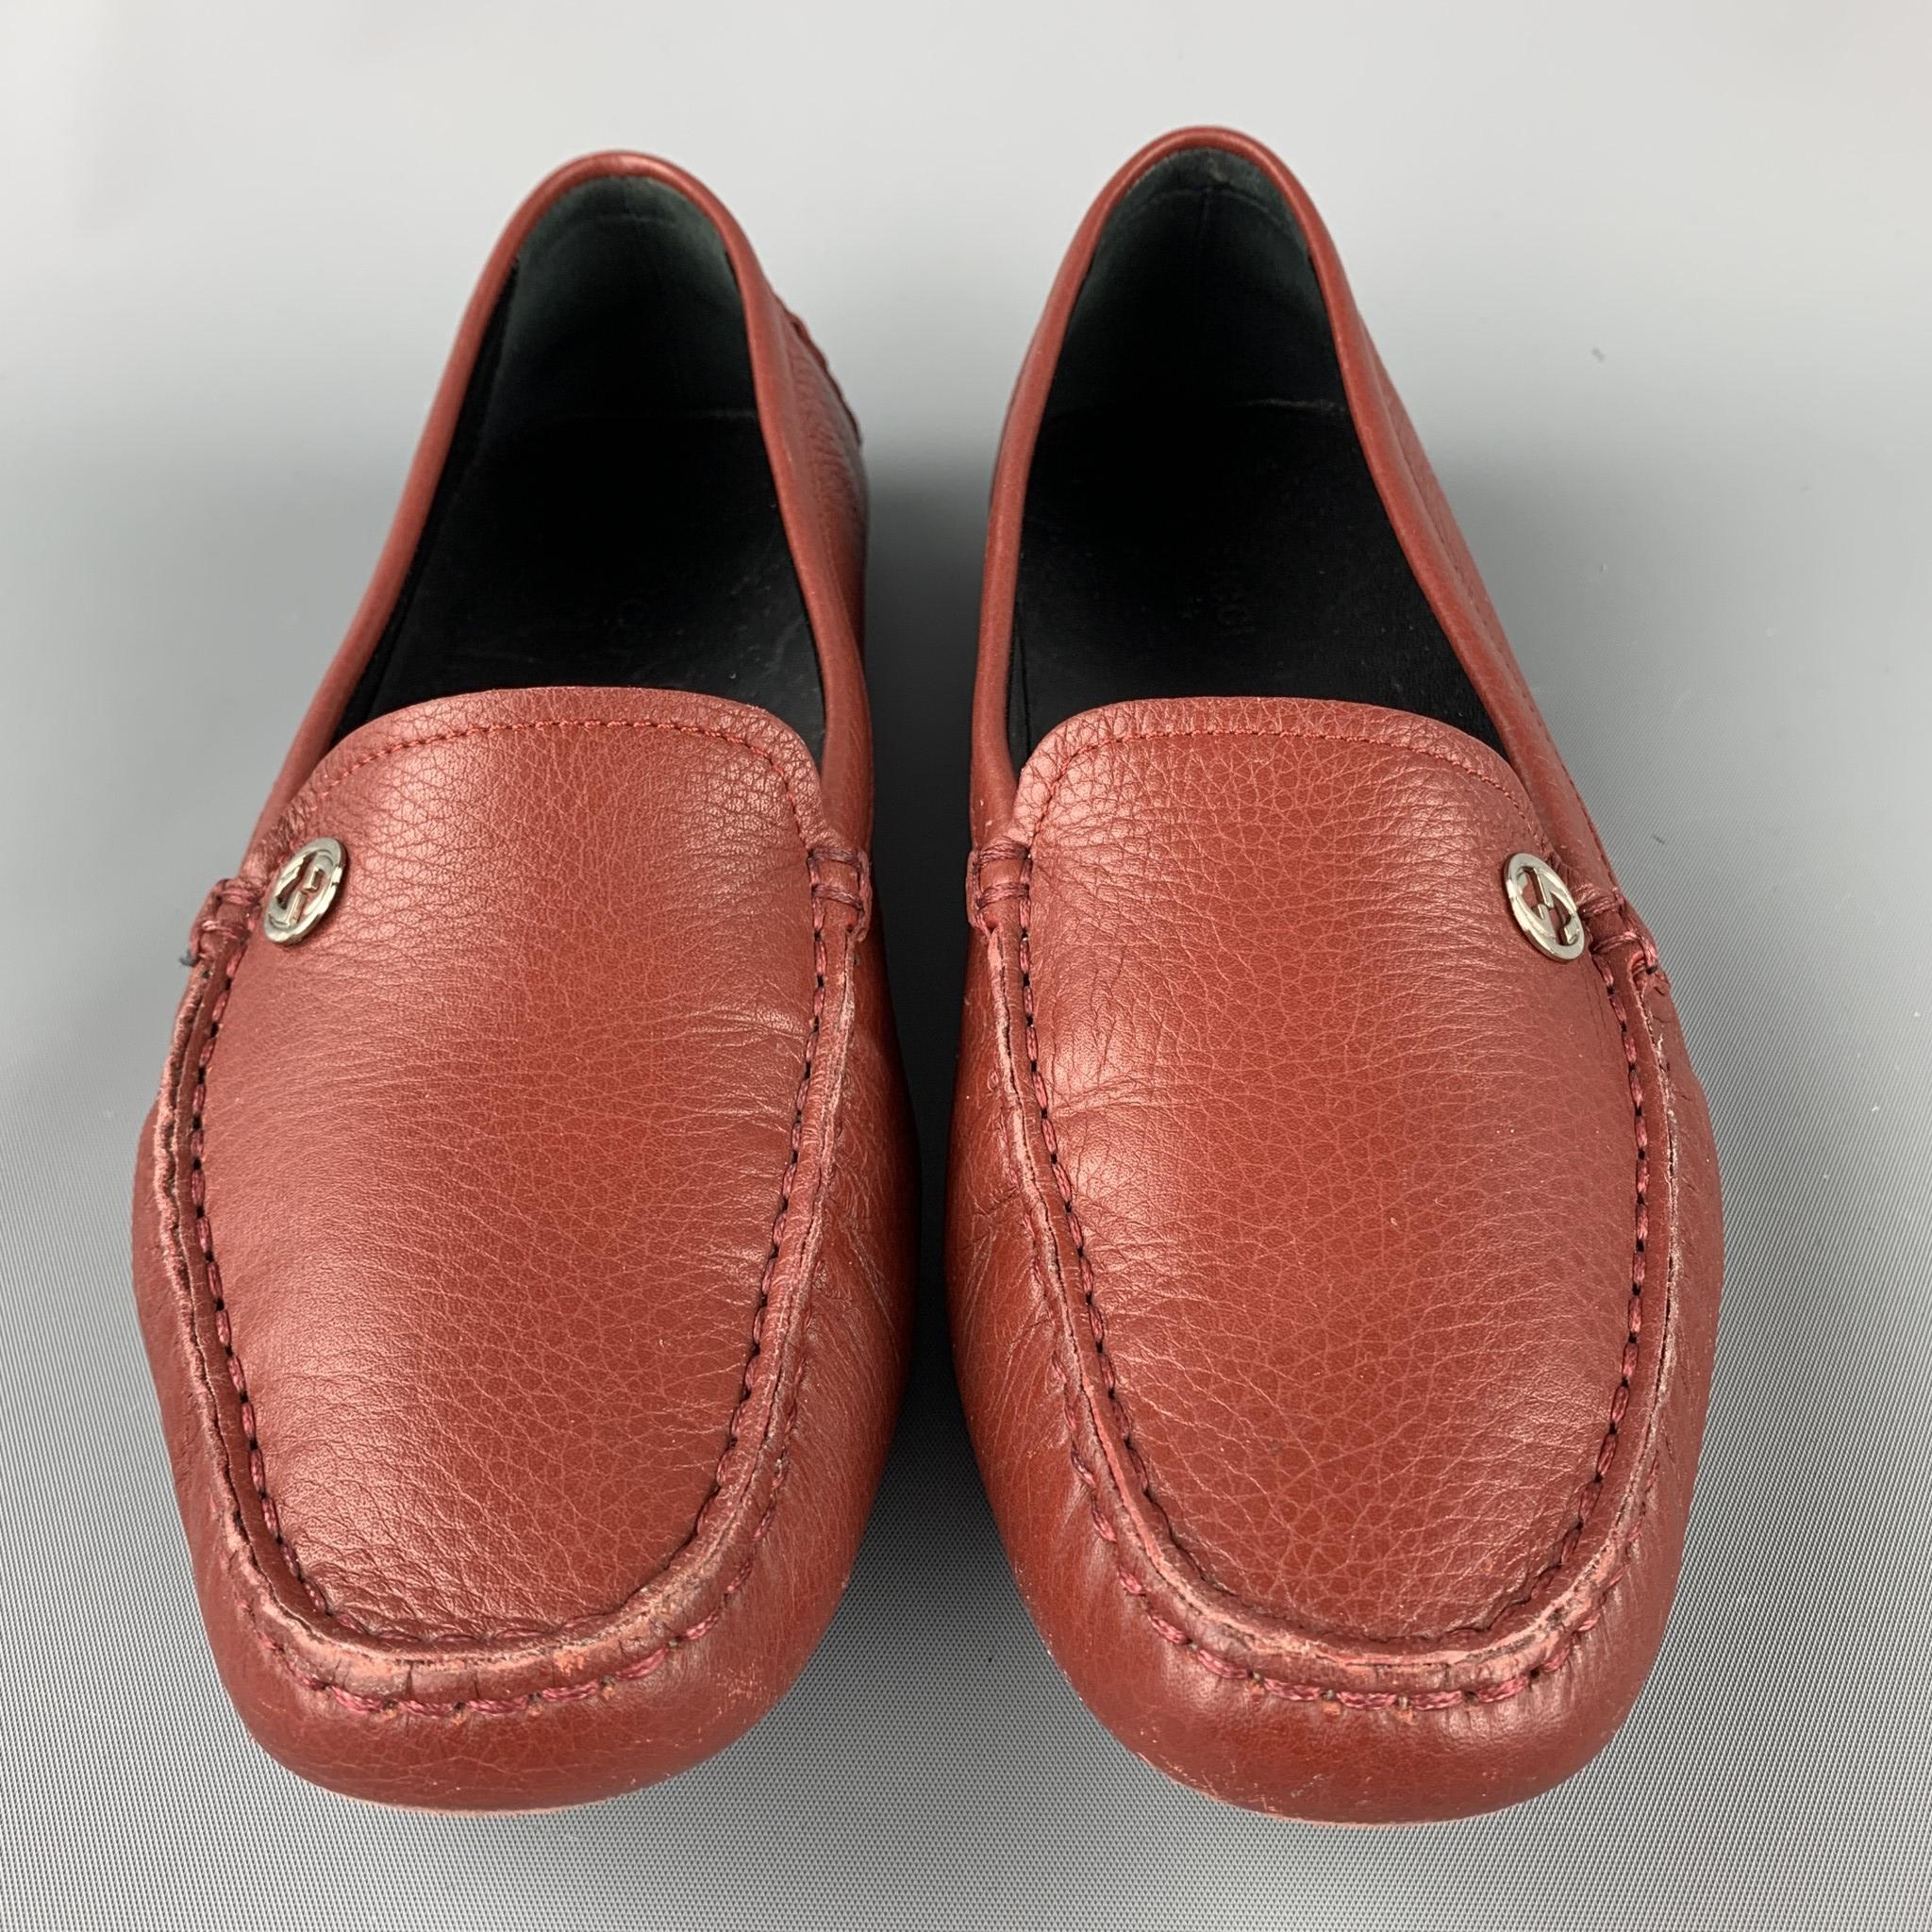 size 8 loafers